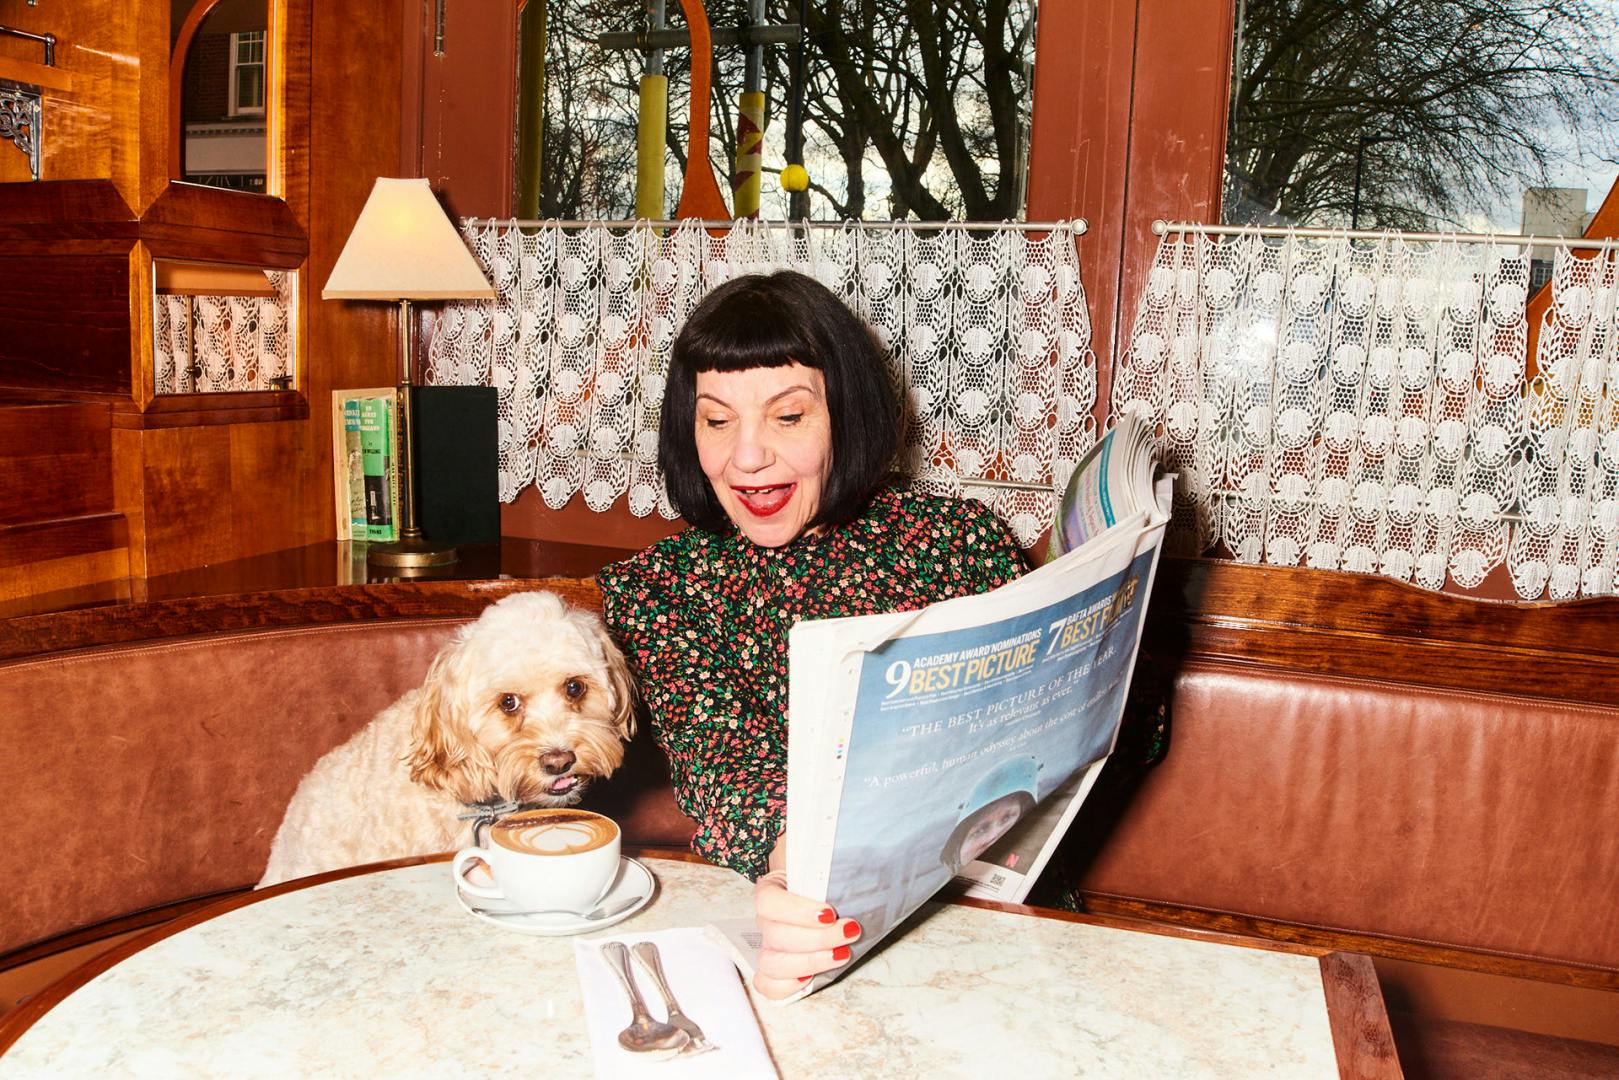 Image from the Wolseley's new digital identity, shown in a photo of a person with a black bob and fringe sat at a table while holding a newspaper next to a small dog leaning over a coffee